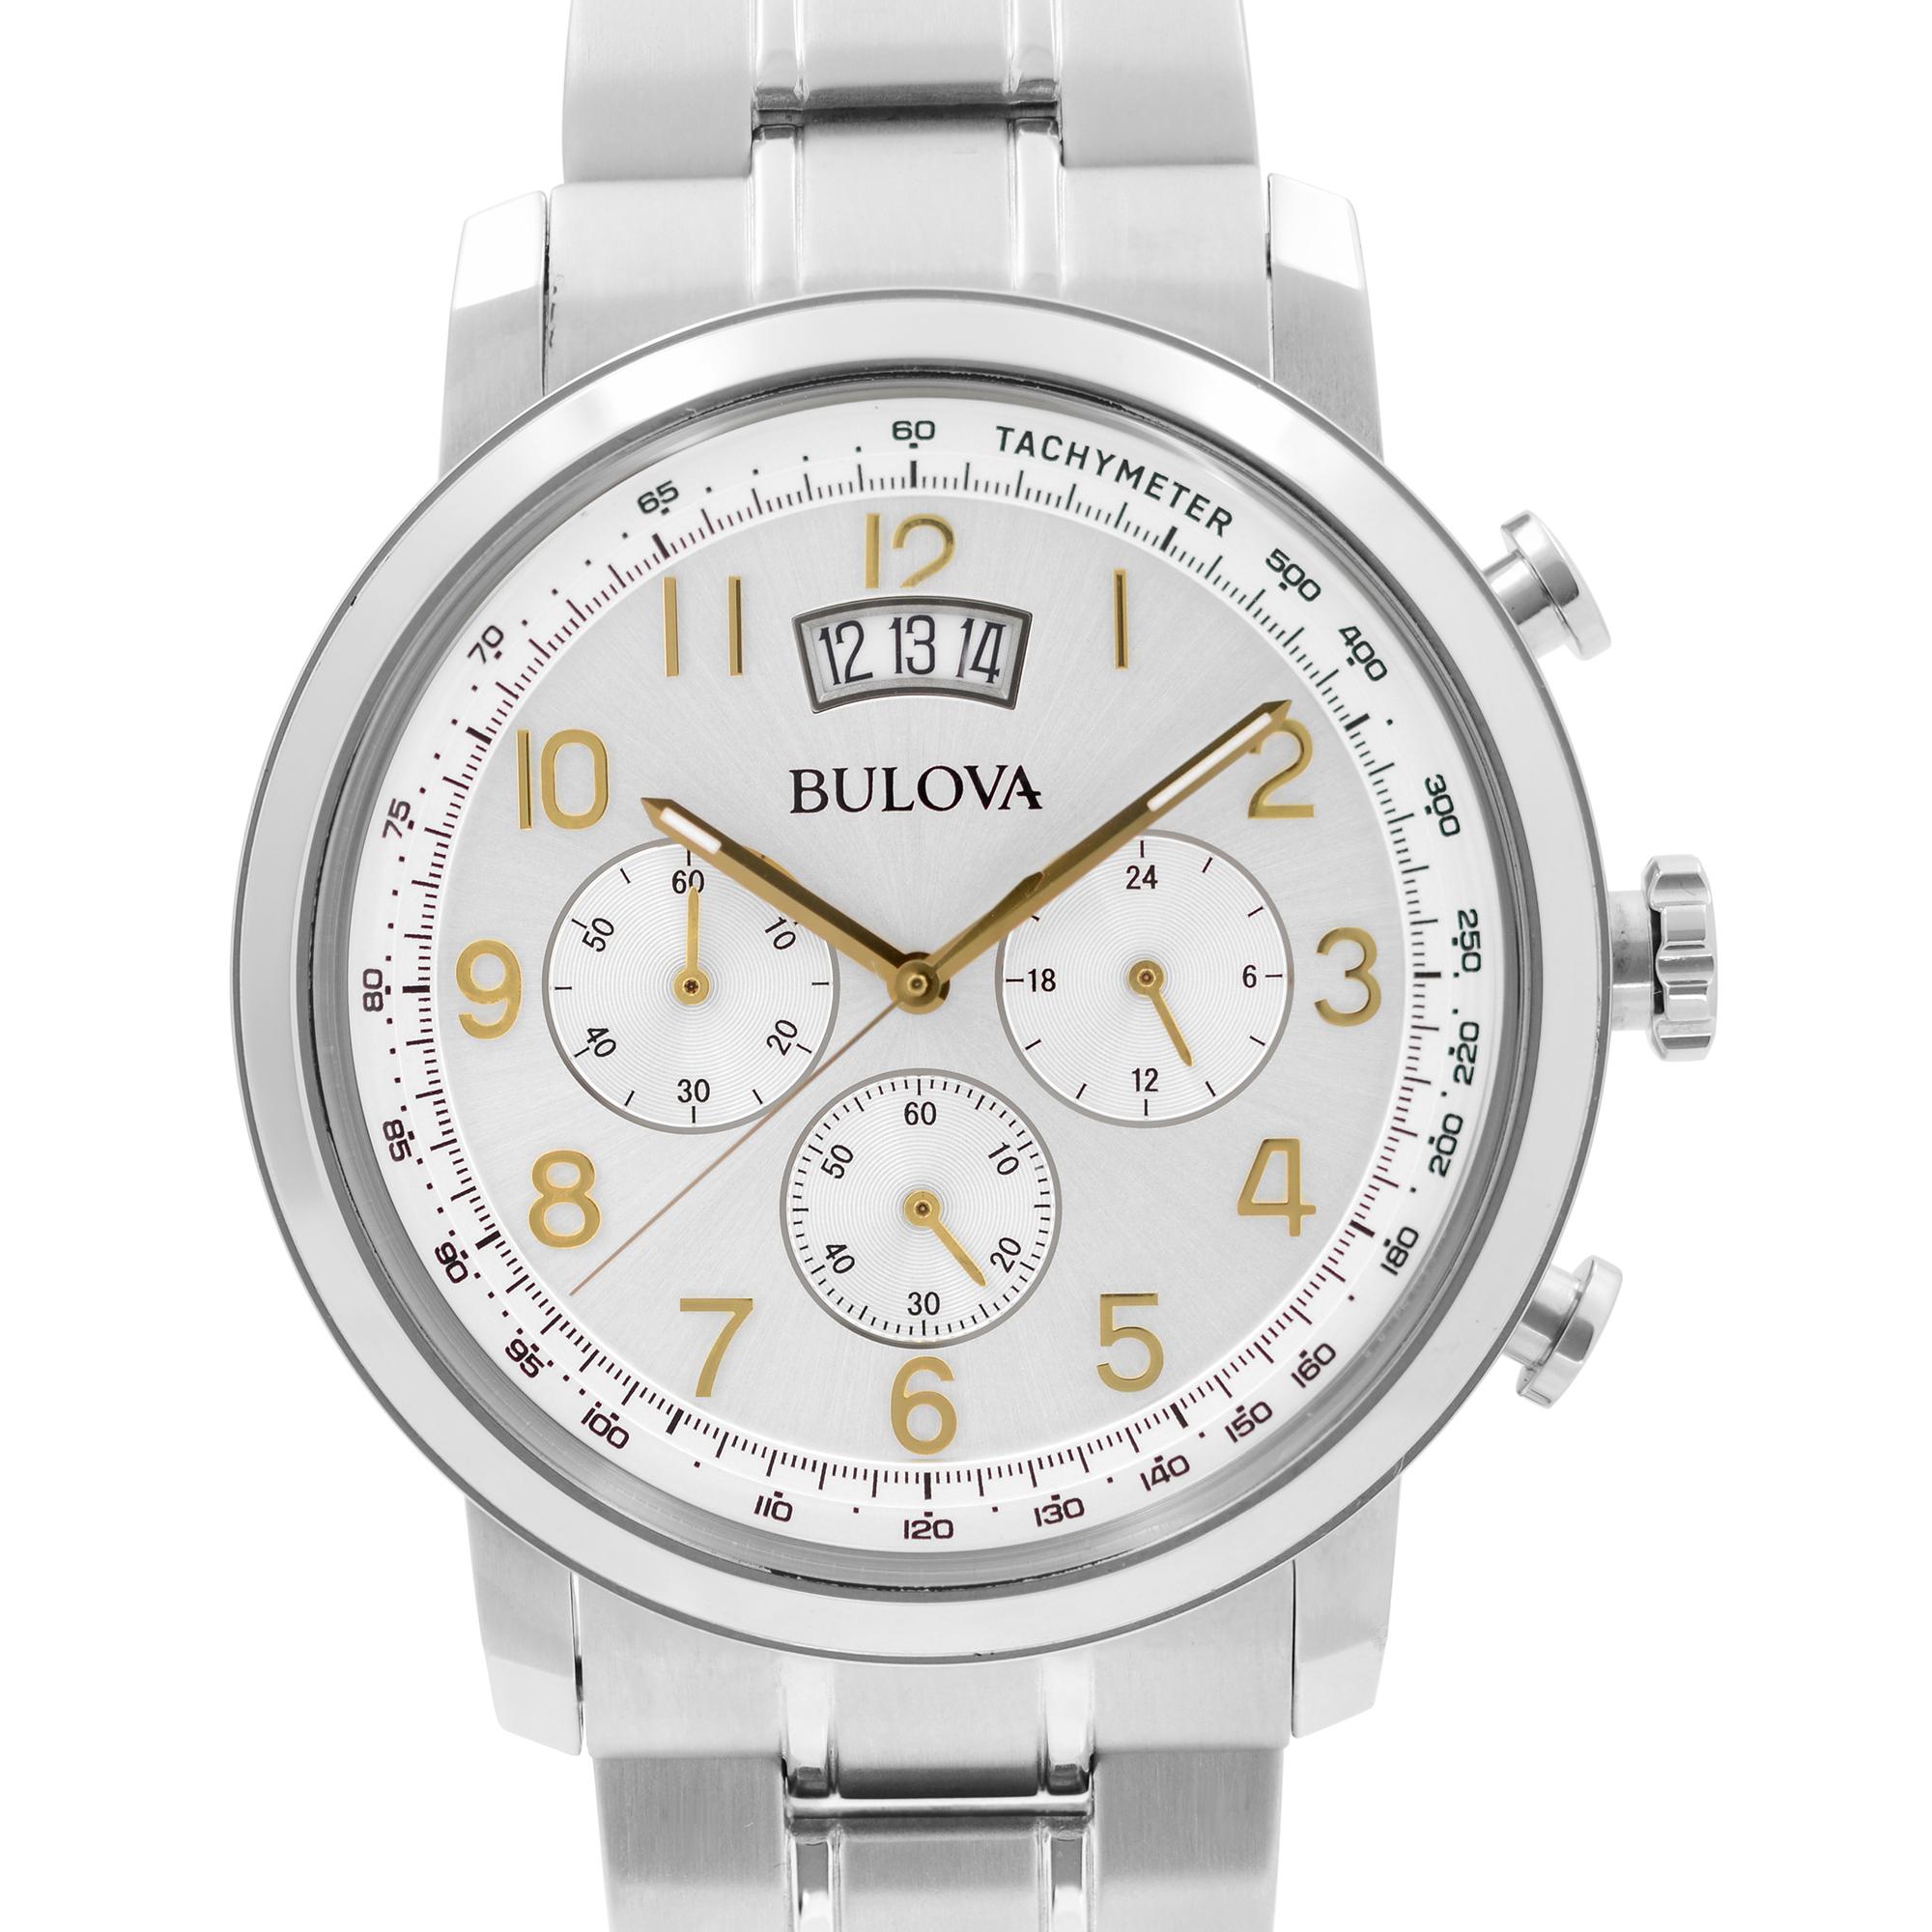 New with Defects Bulova Quartz Men's Watch 96B201. The Watch Has a Couple of Tiny Scratches on the Crystal. This Timepiece Features: Stainless Steel Case and Bracelet, Fixed Stainless Steel Bezel, Silver-Tone Dial with Luminous Gold-Tone Hands, And